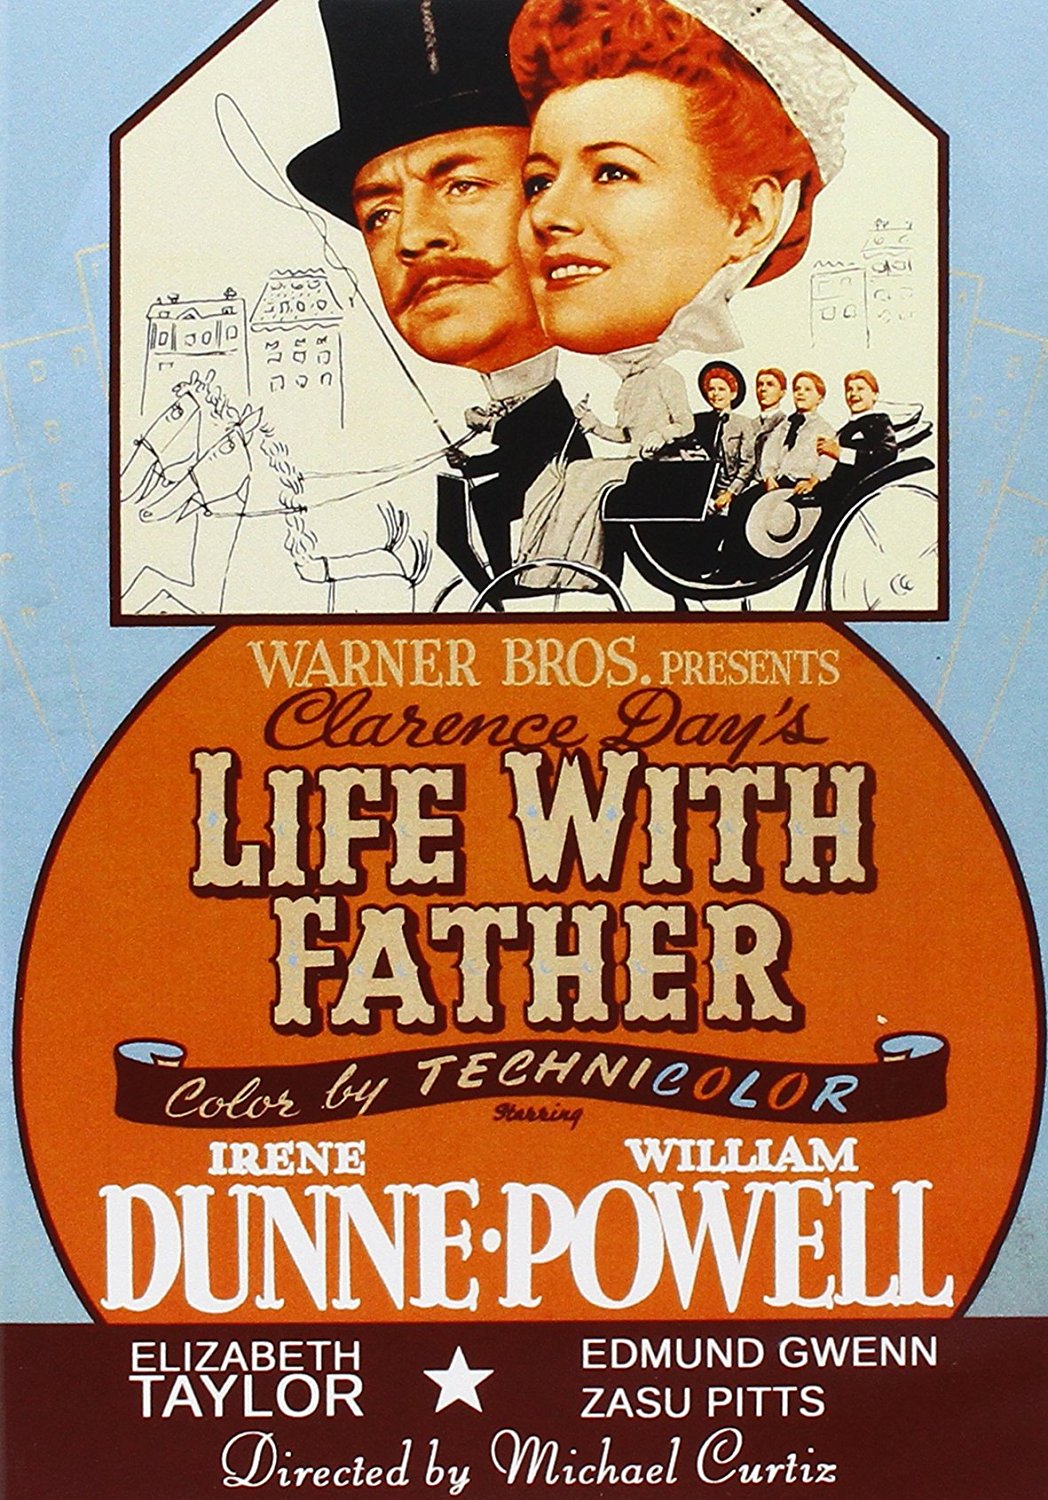 Life with Father (1947) starring William Powell, Irene Dunne, Elizabeth Taylor